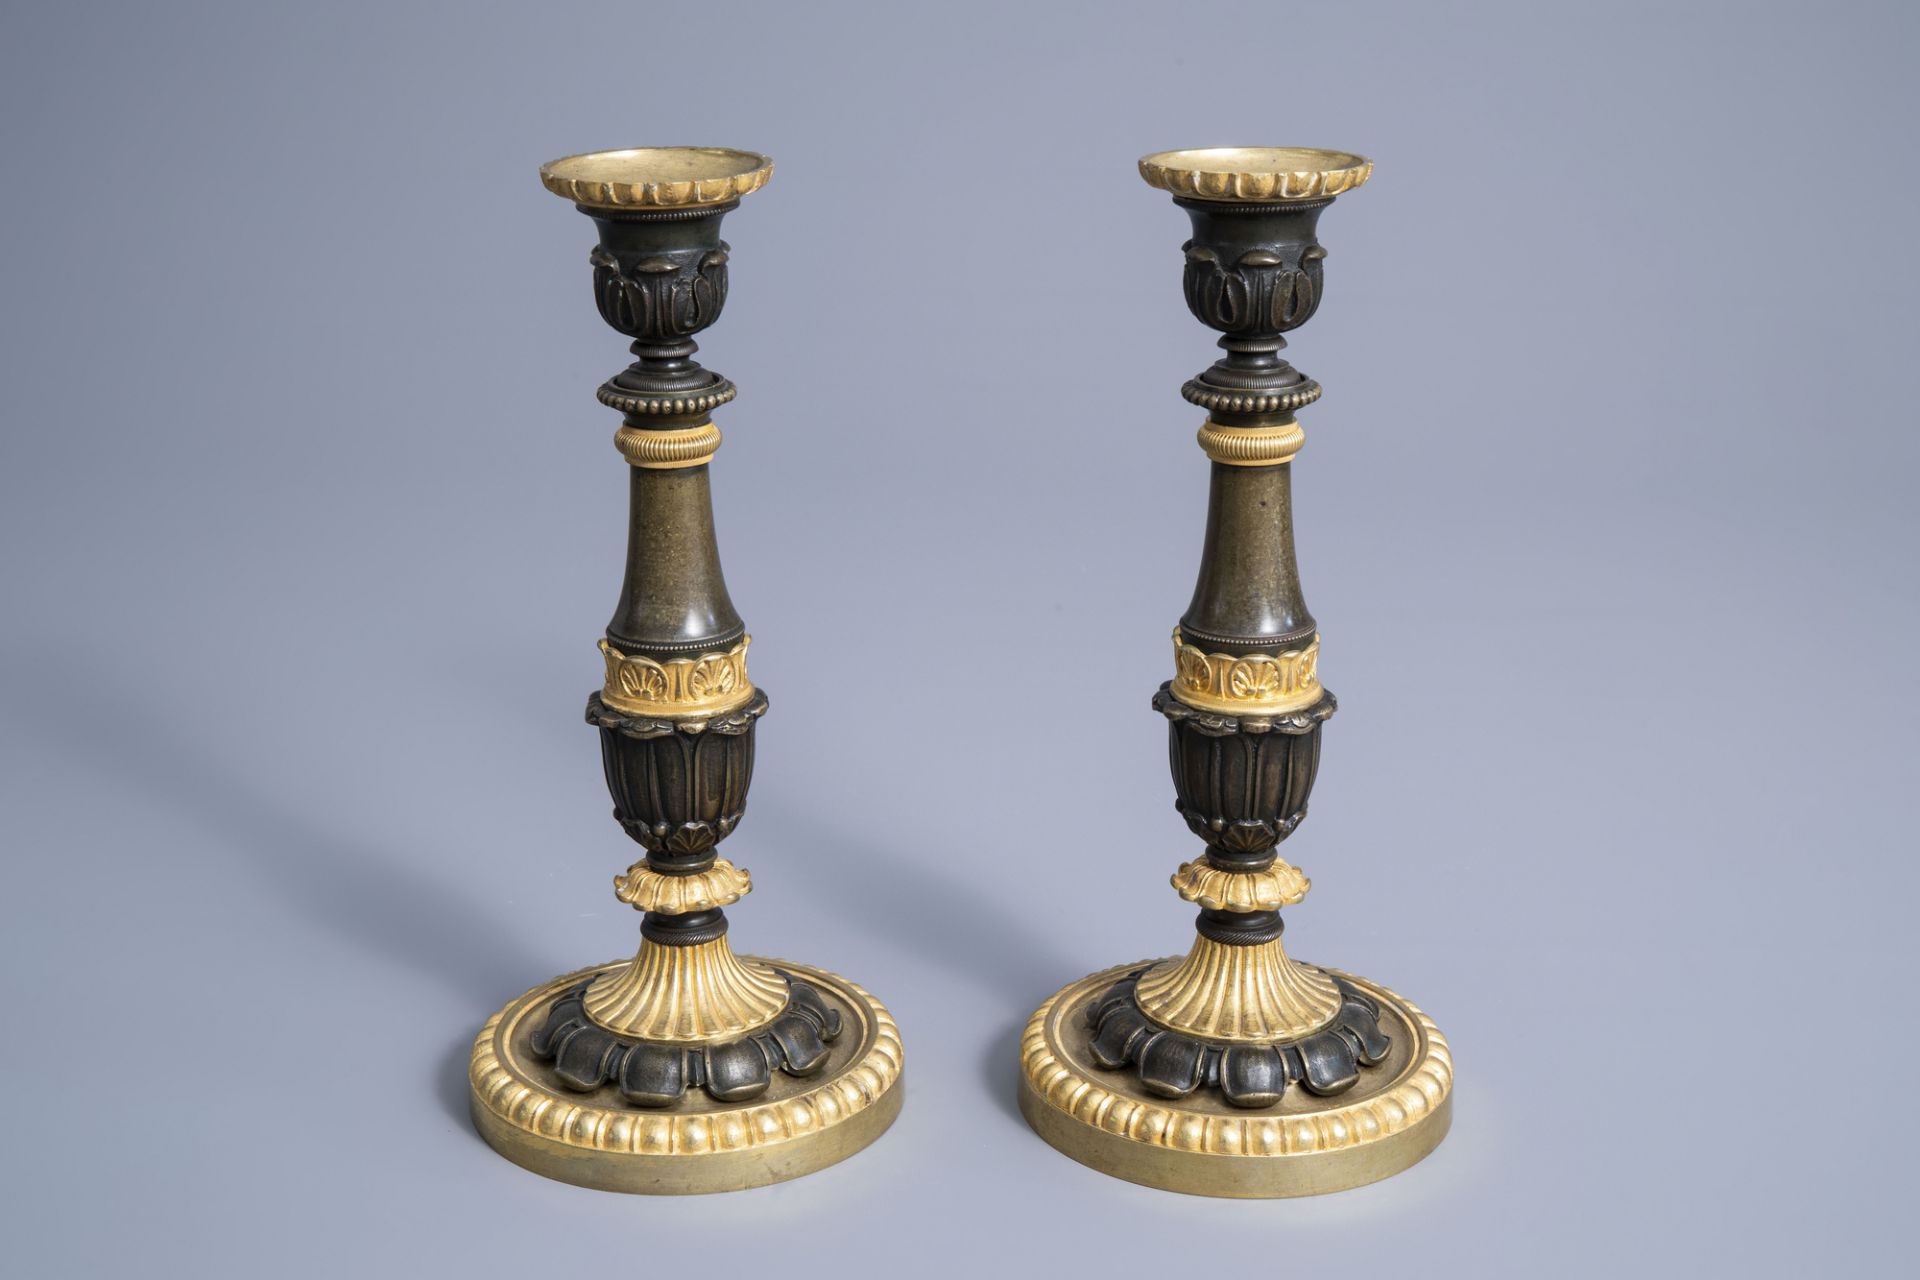 A pair of French gilt and patinated bronze candlesticks with acanthus leaves, 19th C.